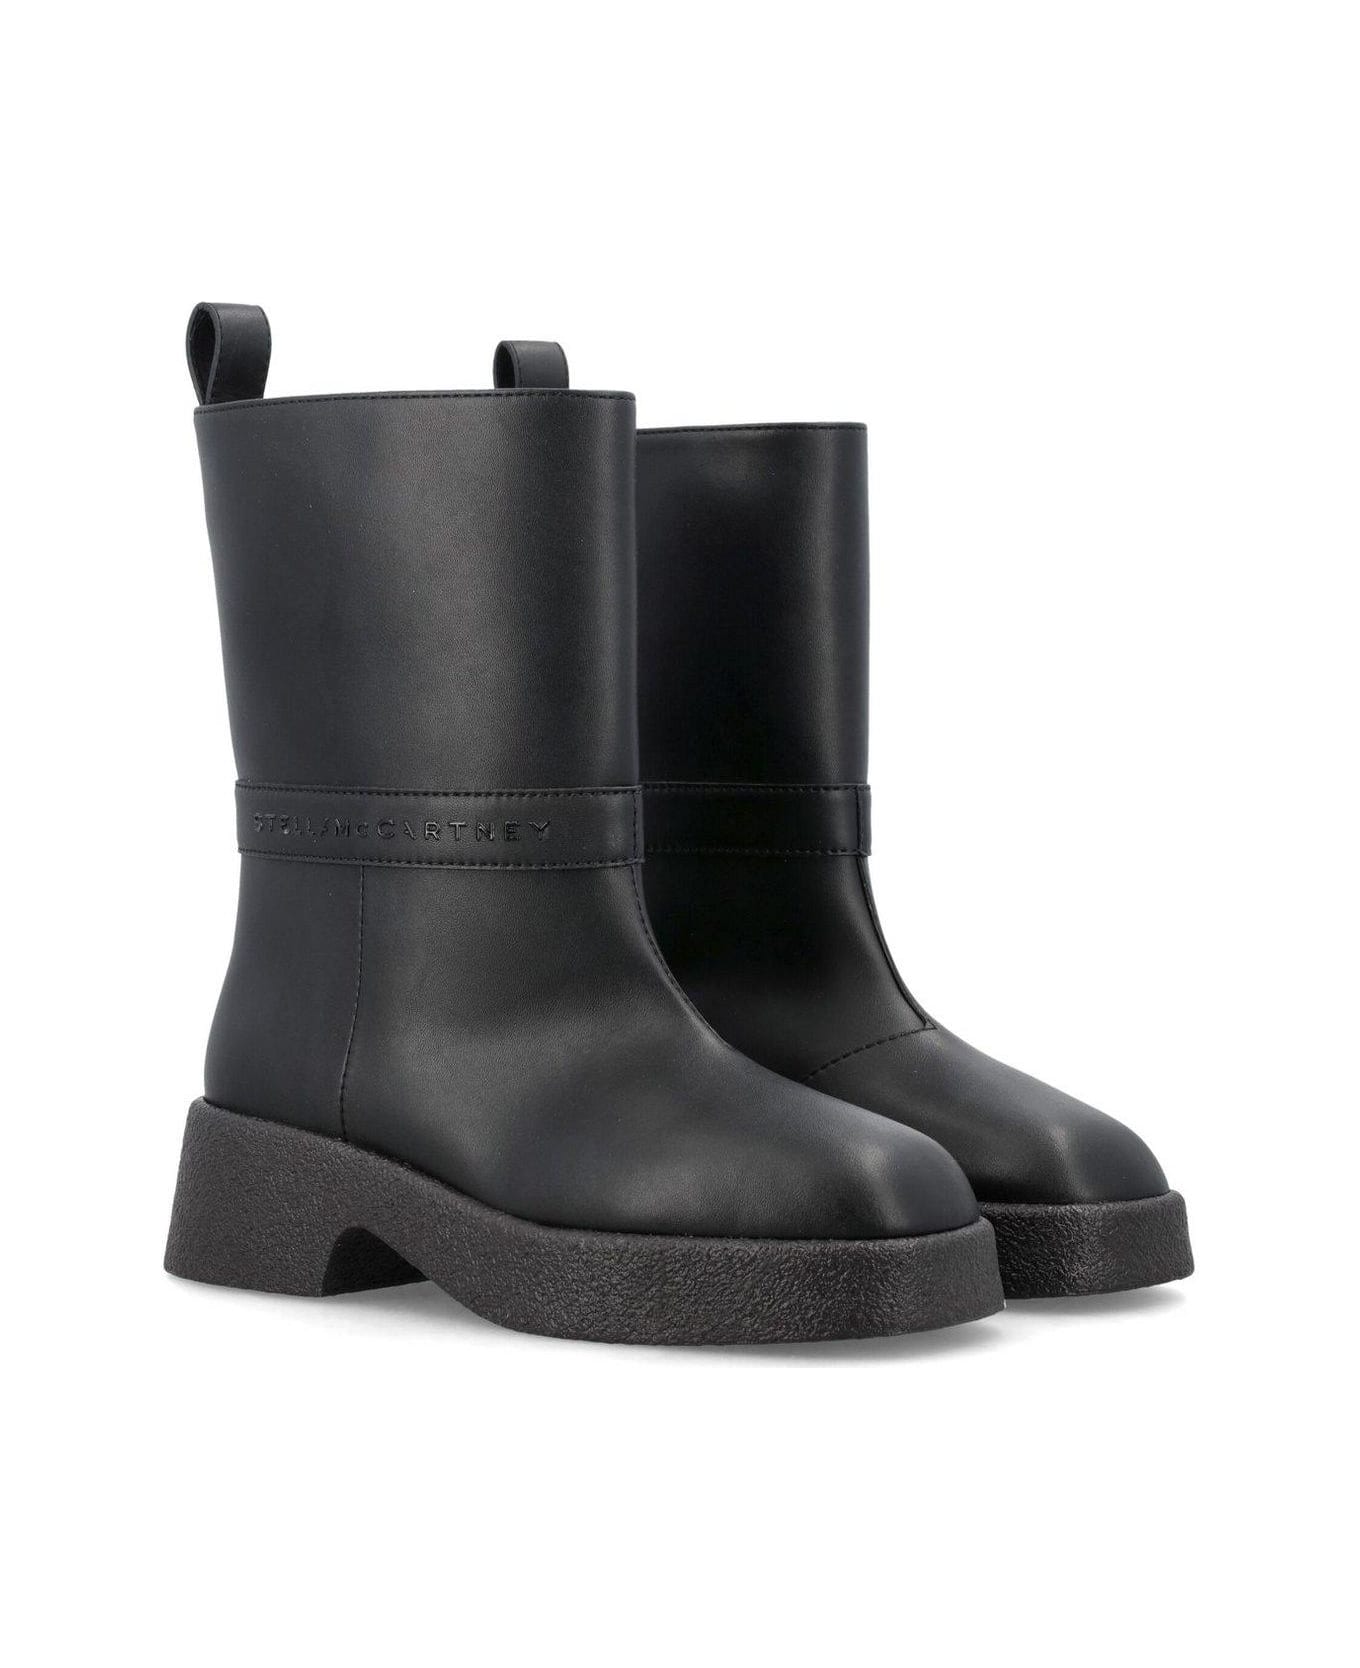 Stella McCartney Logo Lettering Pull-on Ankle Boots - Black ブーツ